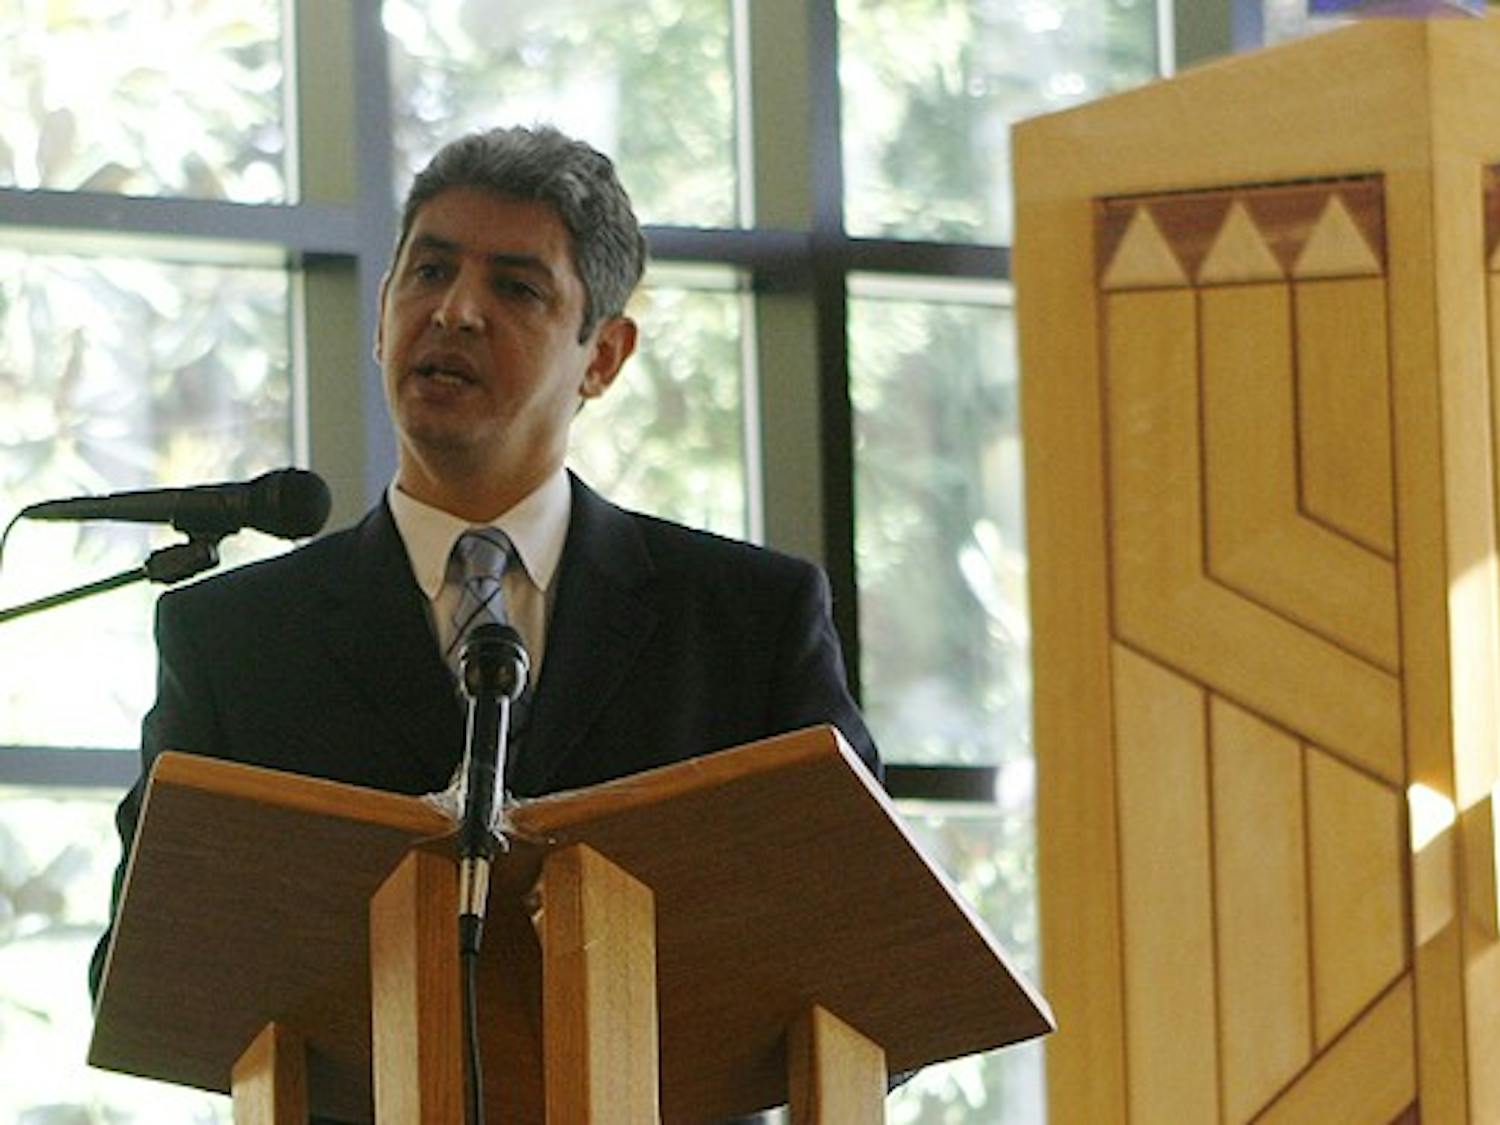 Ambassador Reda Mansour, consul general of Israel to the Southeast, emphasizes Israel as a diverse and dynamic nation during the annual Israel student conference at the Freeman Center for Jewish Life Sunday.